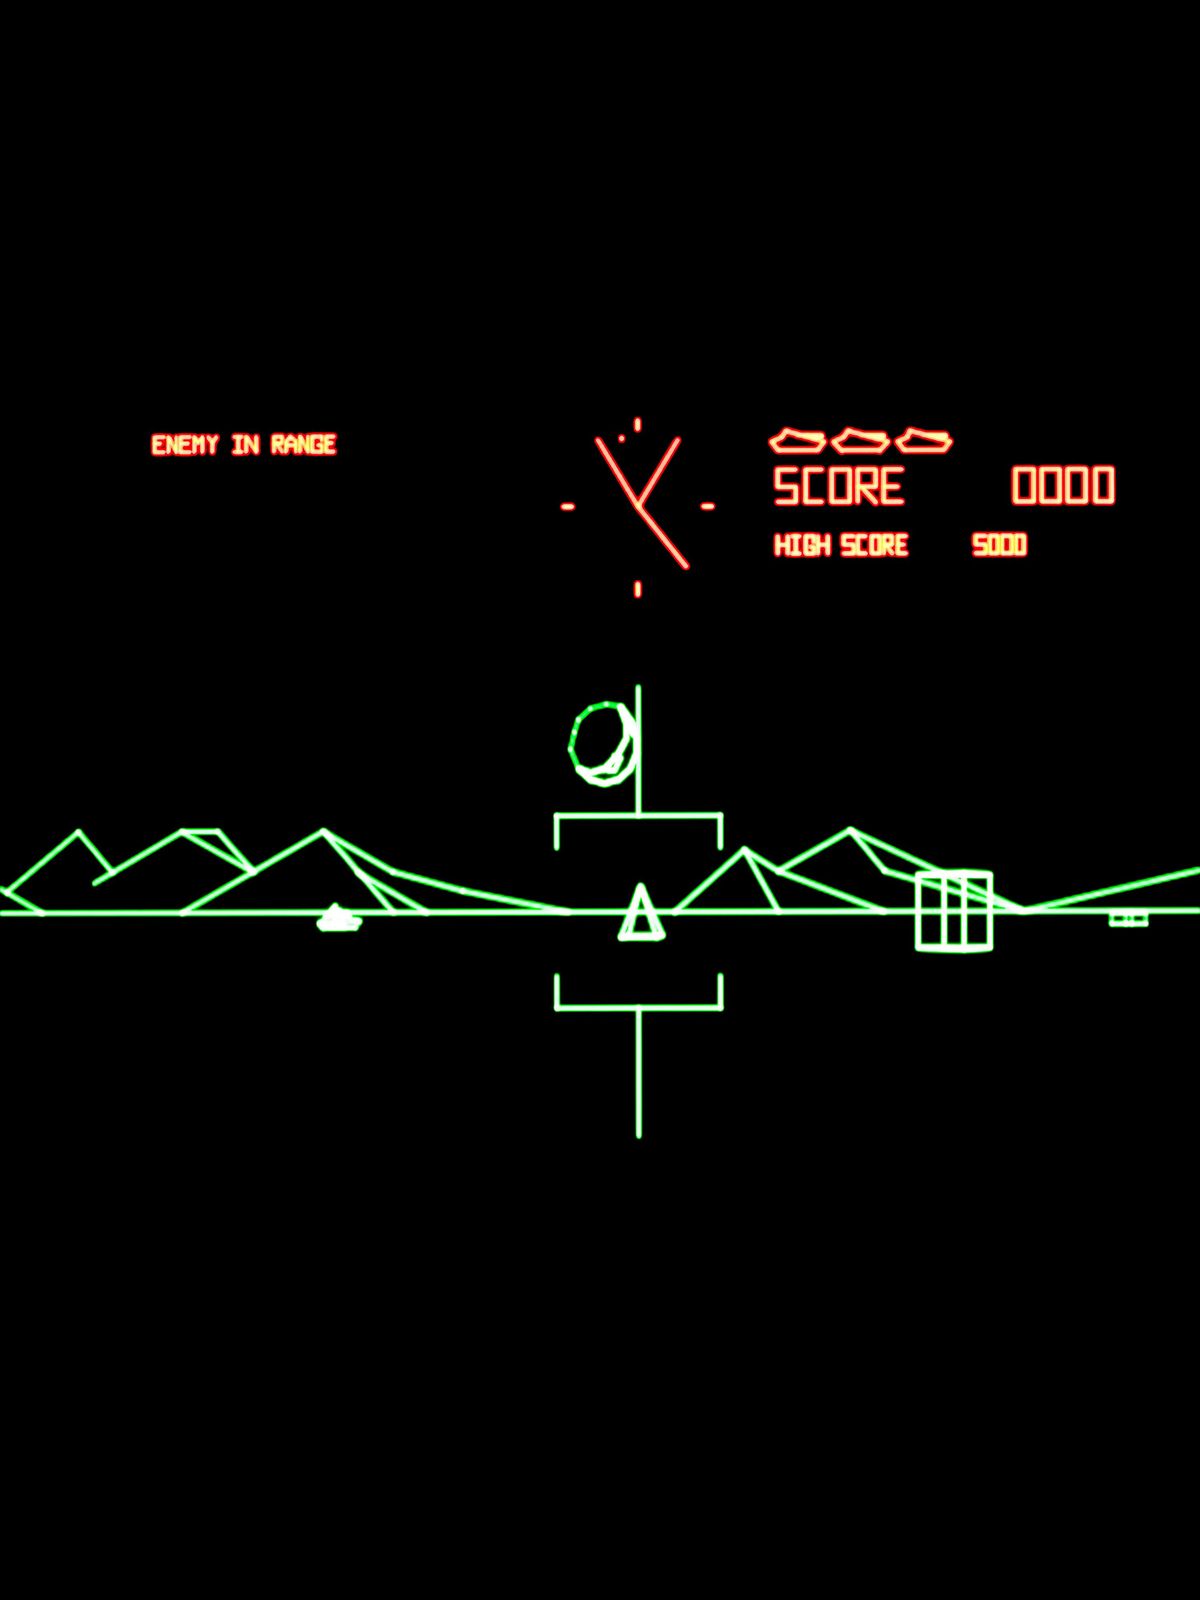 battlezone-atari-1980-arcade-videogame-screenshot-showing-score-field-at-top-in-orange-and-line-drawing-of-mountains-and-gun-sc.jpg